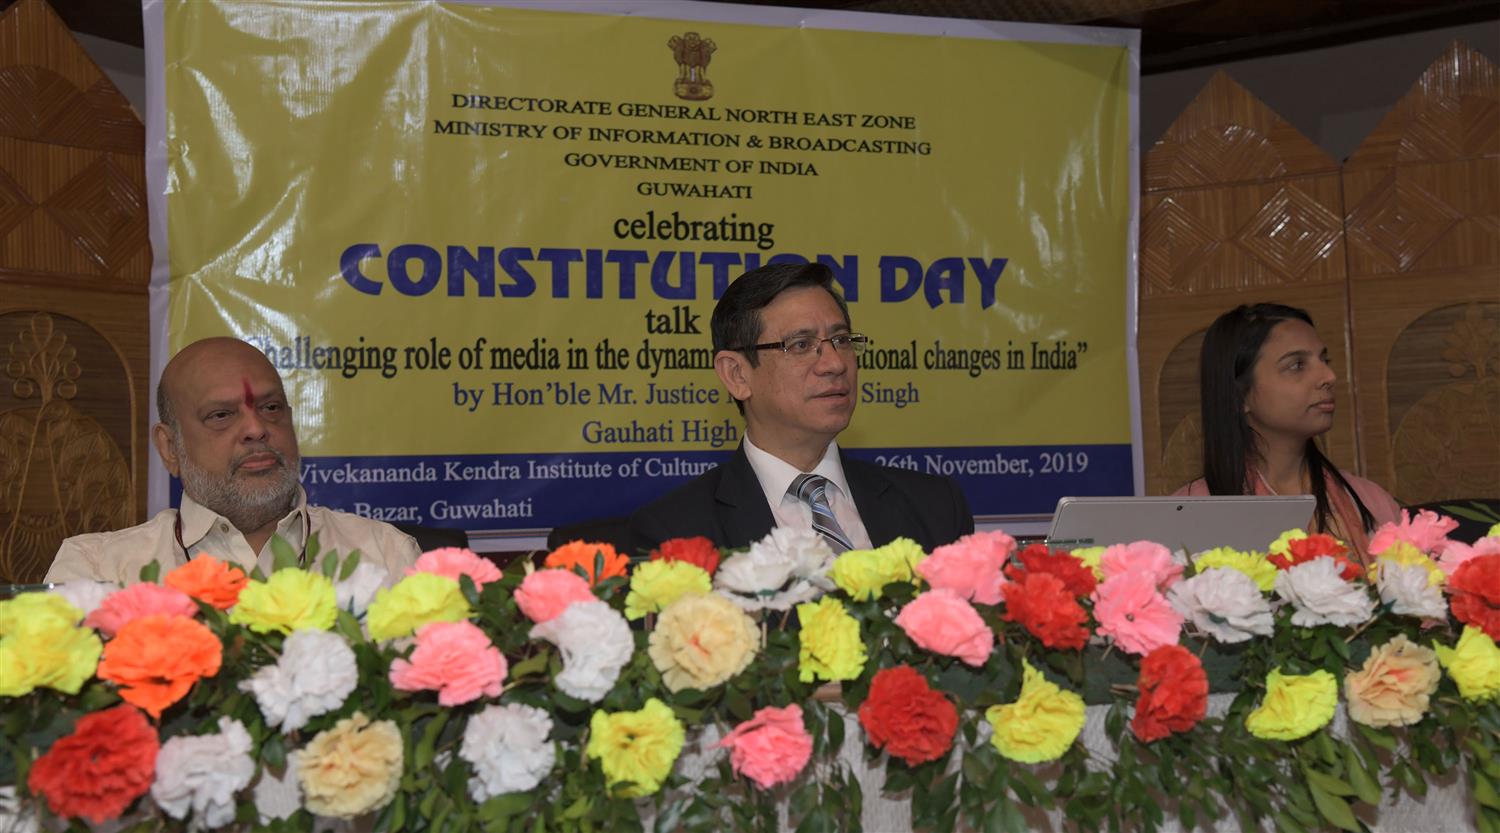 JUSTICE GUWAHATI HIGH COURT SHRI KOTISWAR SINGH, SHRI L R VISHWANATH, DIRECTOR GENERAL, MINISTRY OF INFORMATION & BROADCASTING, SMT. KEERTI TEWARI, JOINT DIRECTOR, PIB GUWAHATI  ARE SEEN  AT AN FUNCTION OF THE 70TH CONSTITUTION DAY “CHALLENGING ROLE OF MEDIA IN THE DYNAMICS OF CONSTITUTIONAL CHANGES IN INDIA” BY REGIONAL OUTREACH BUREAU, MINISTRY OF INFORMATION &  BROADCASTING, GUWAHATI ON 26TH NOVEMBER 2019 AT GUWAHATI.